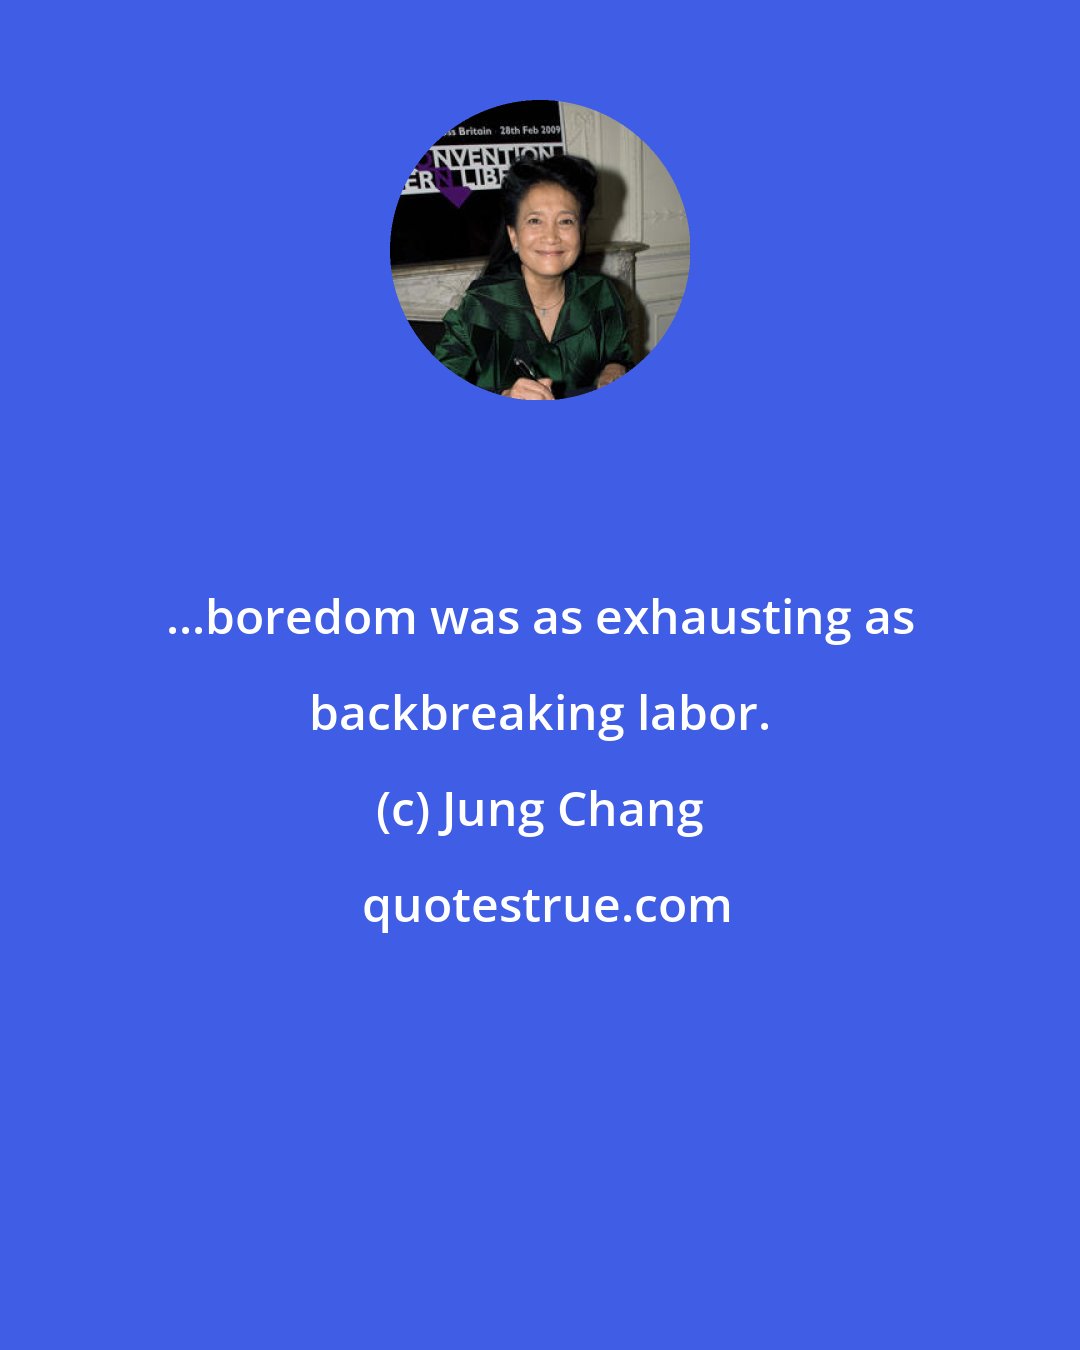 Jung Chang: ...boredom was as exhausting as backbreaking labor.